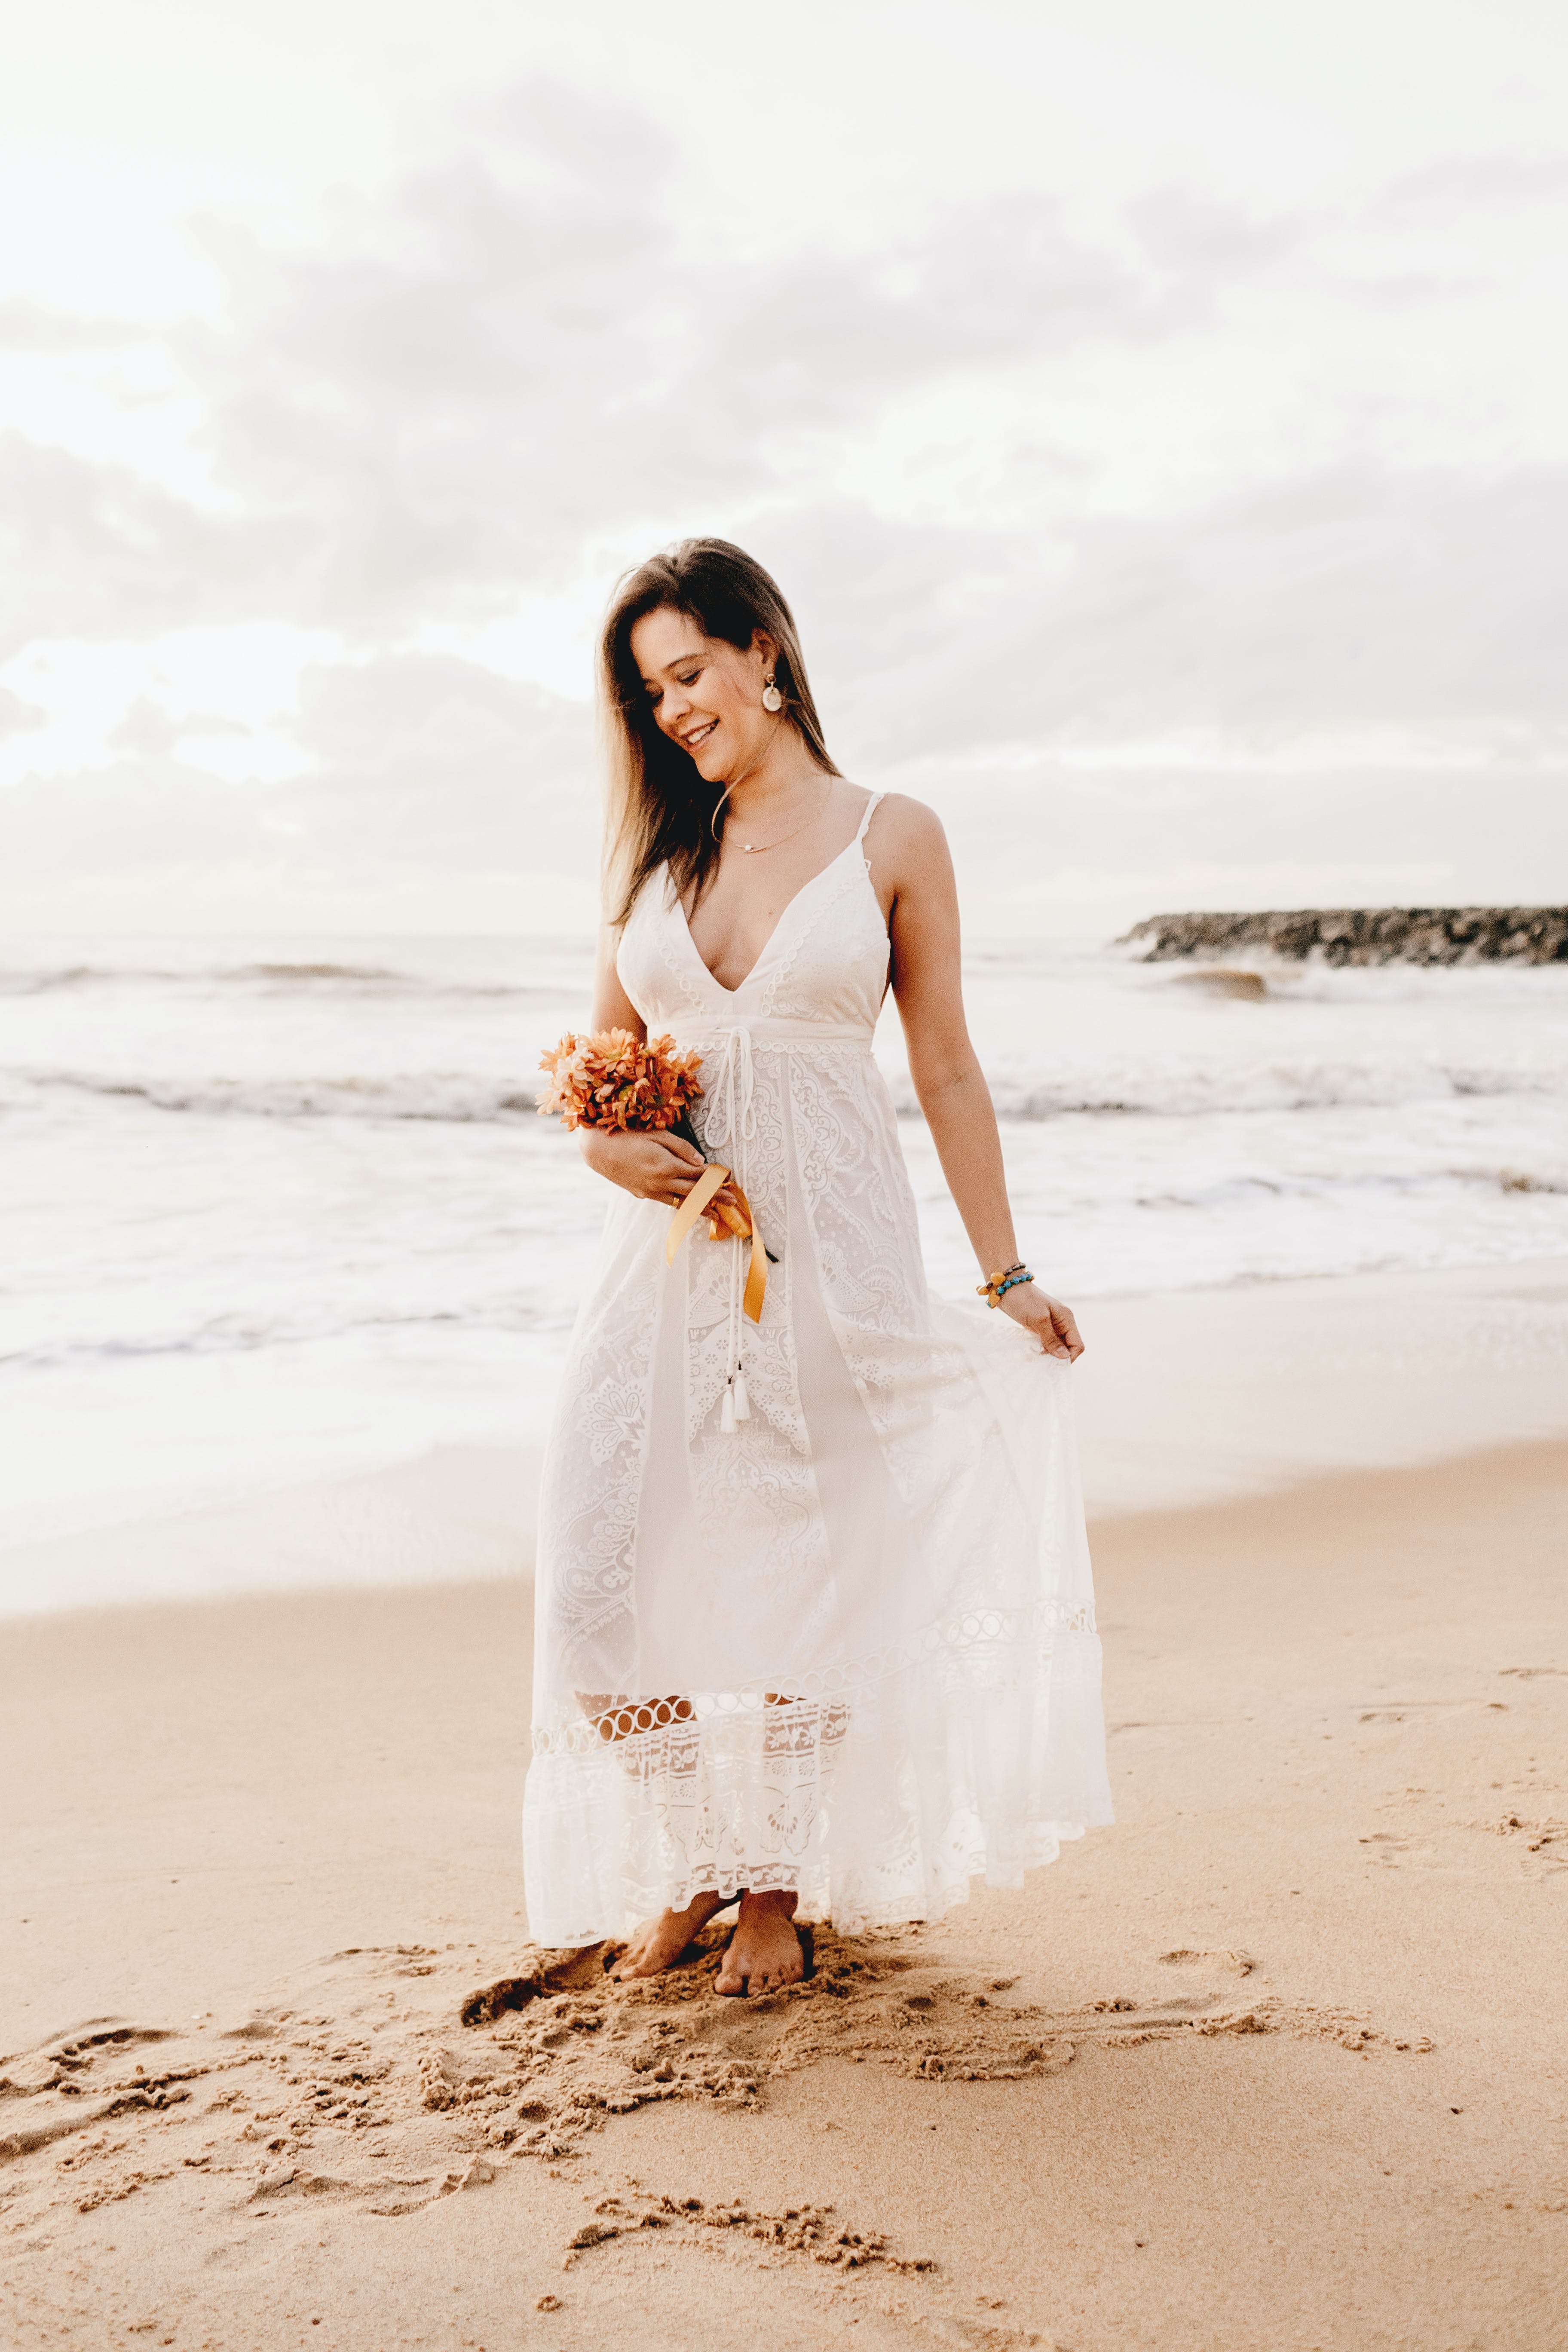 Finding the Best Shoes for Your Destination Beach Wedding